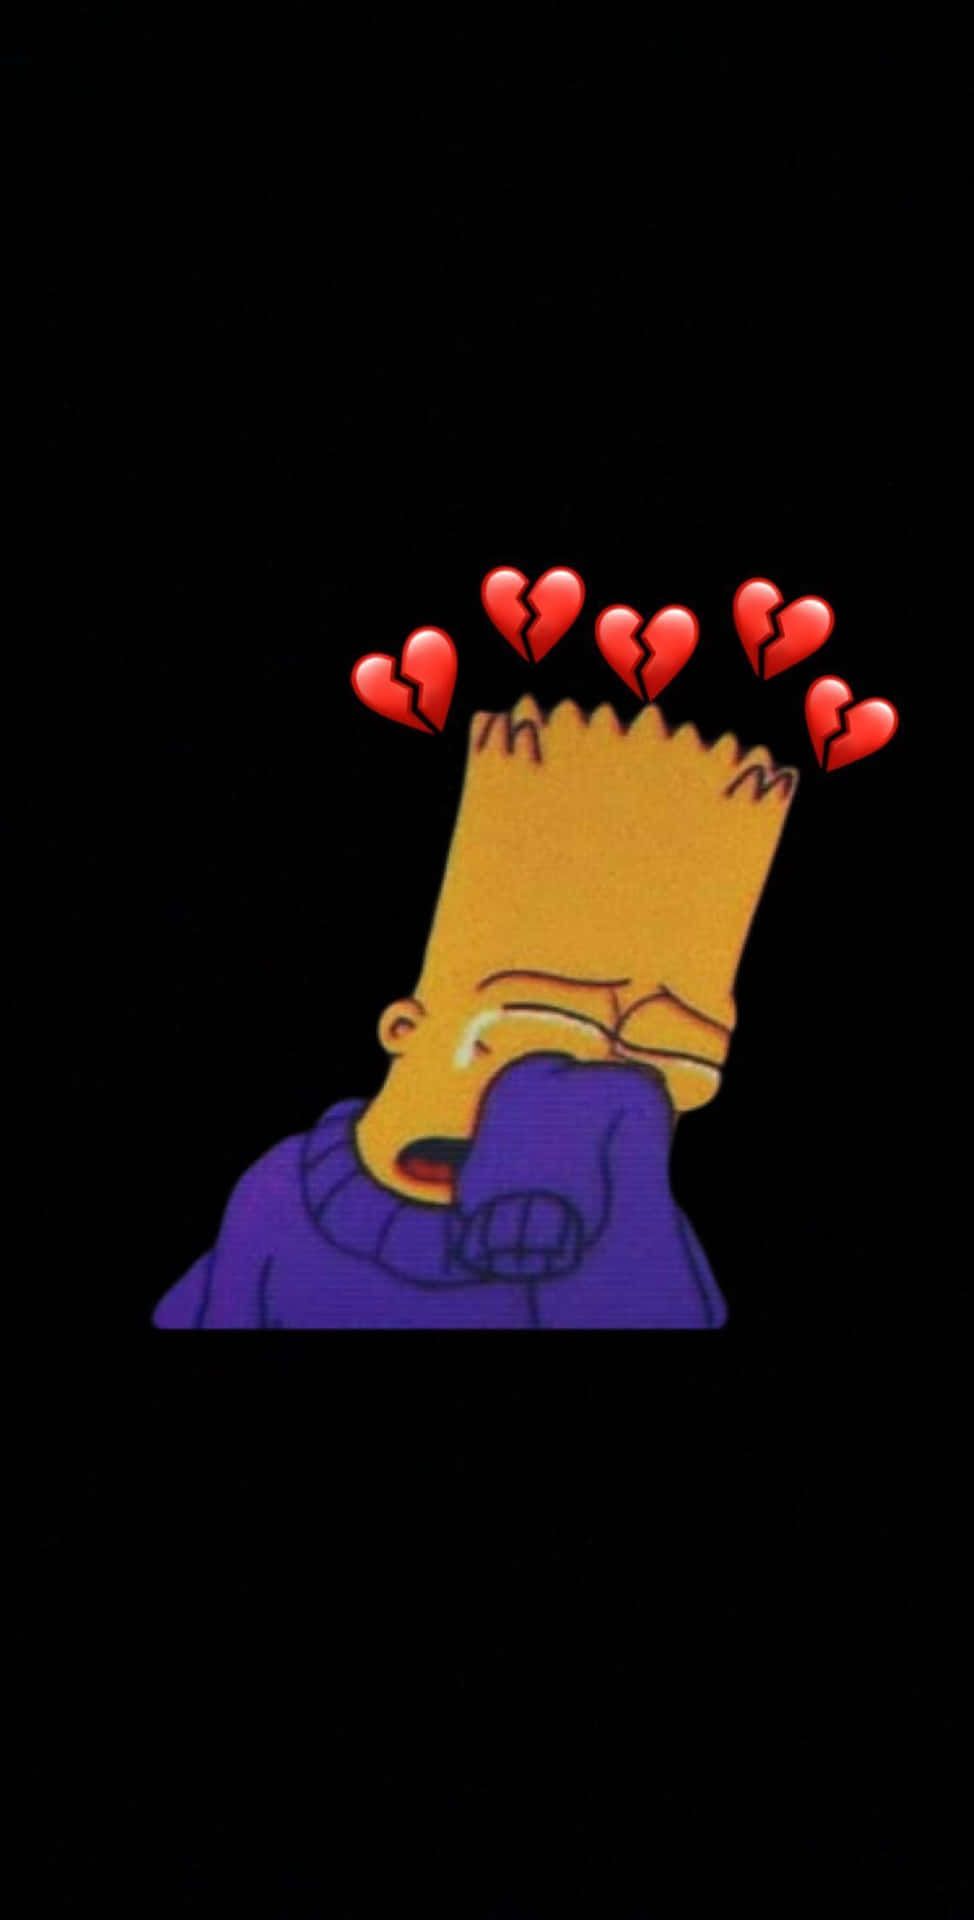 A simpsons character with hearts around it - The Simpsons